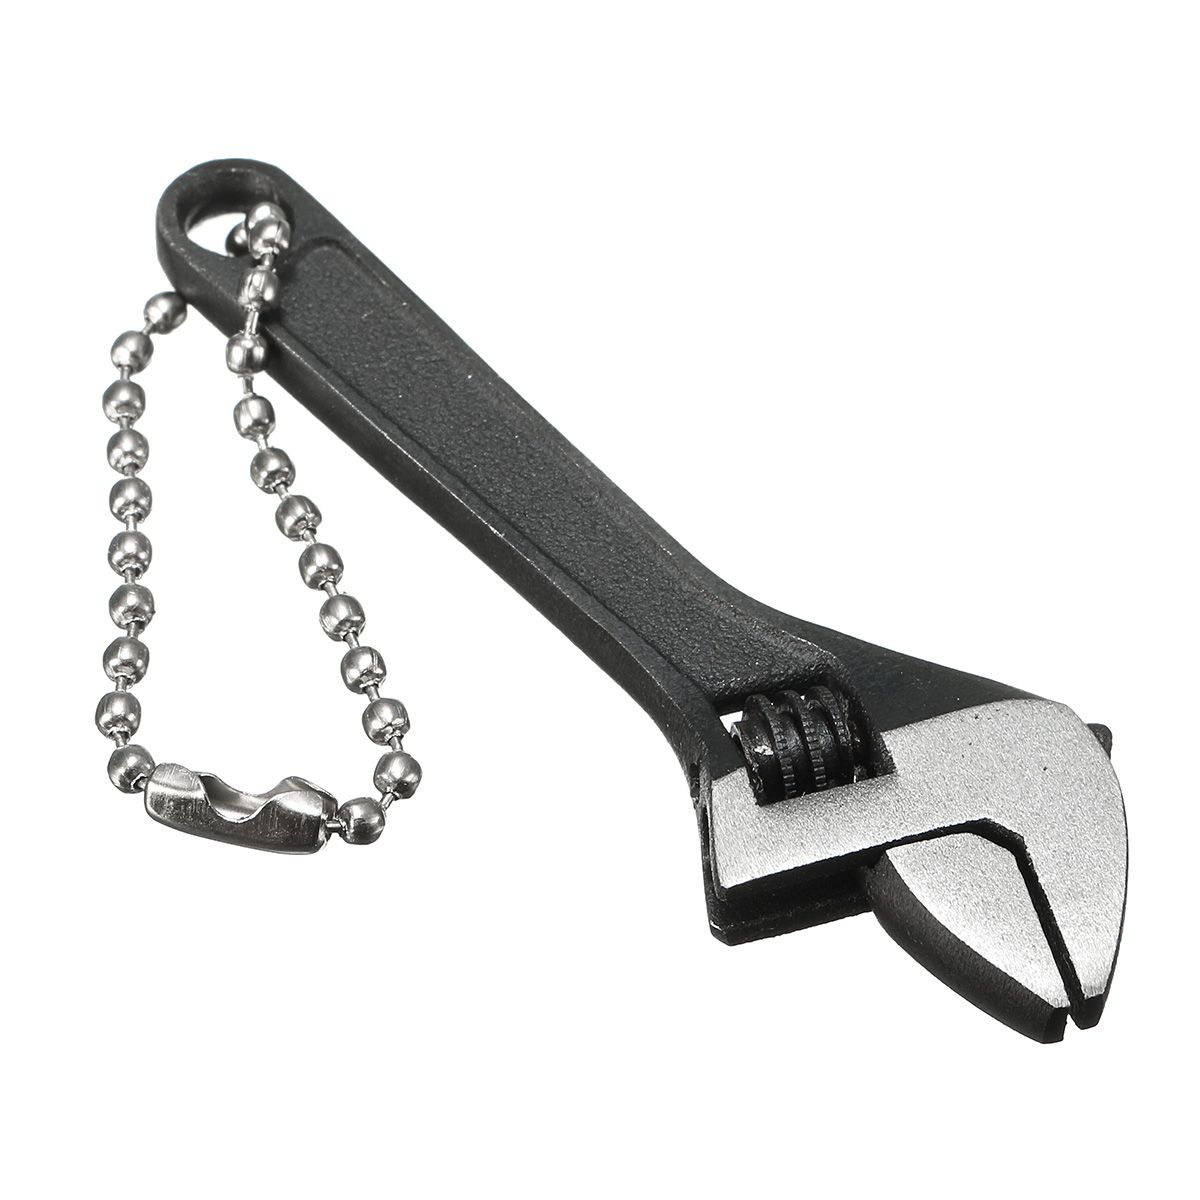 DANIU-66mm-26inch-Mini-Metal-Adjustable-Wrench-Spanner-Hand-Tool-0-10mm-Jaw-Wrench-Black-1199883